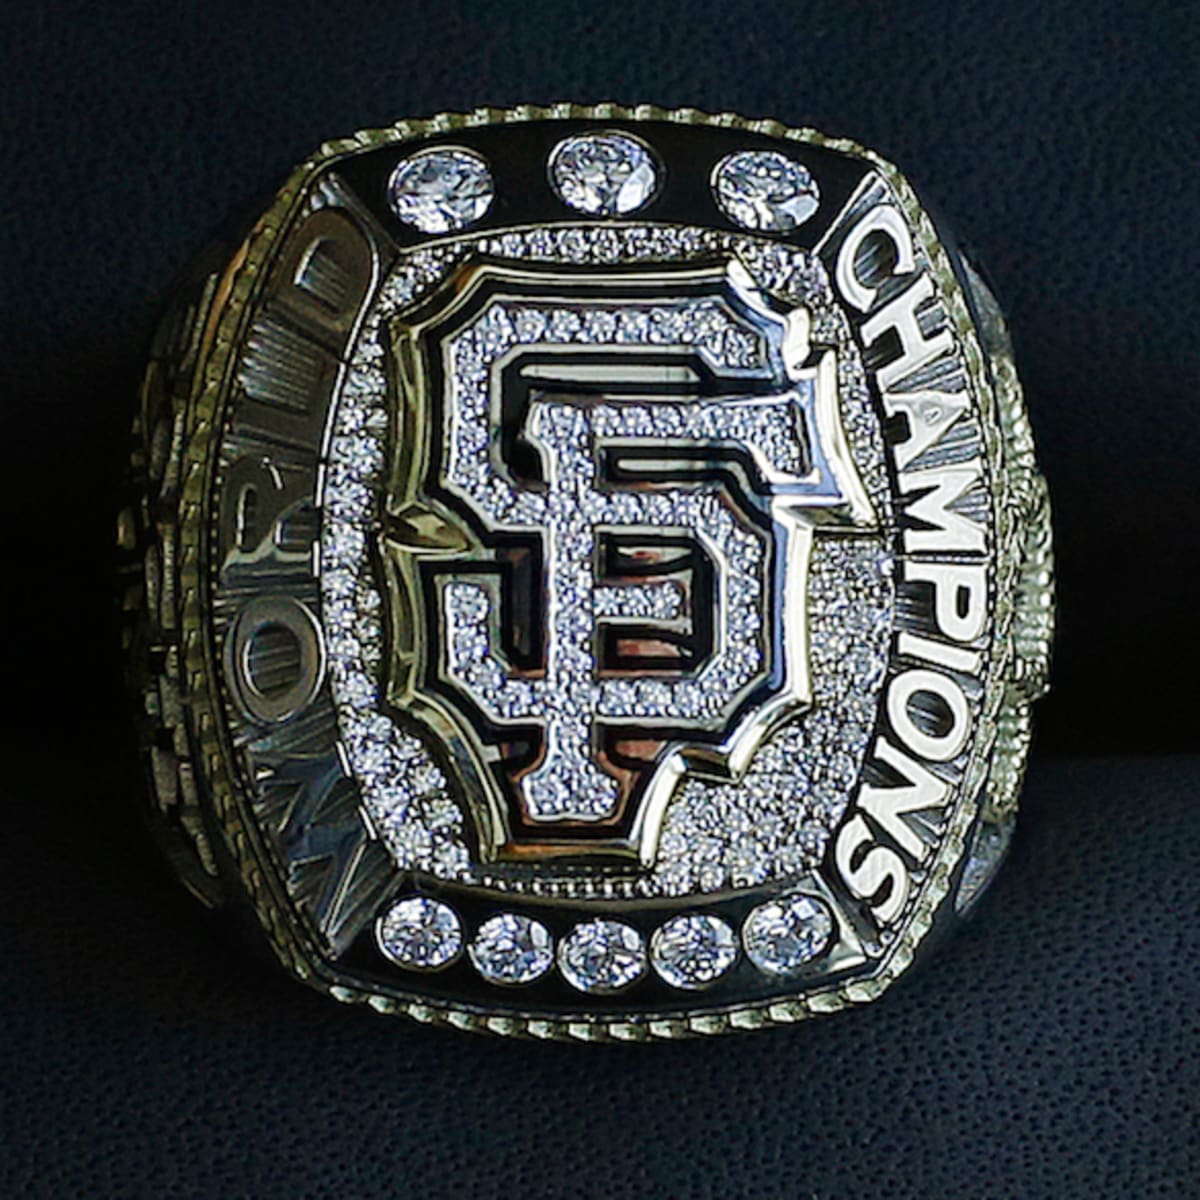 San Francisco Giants receive World Series rings - Sports Illustrated